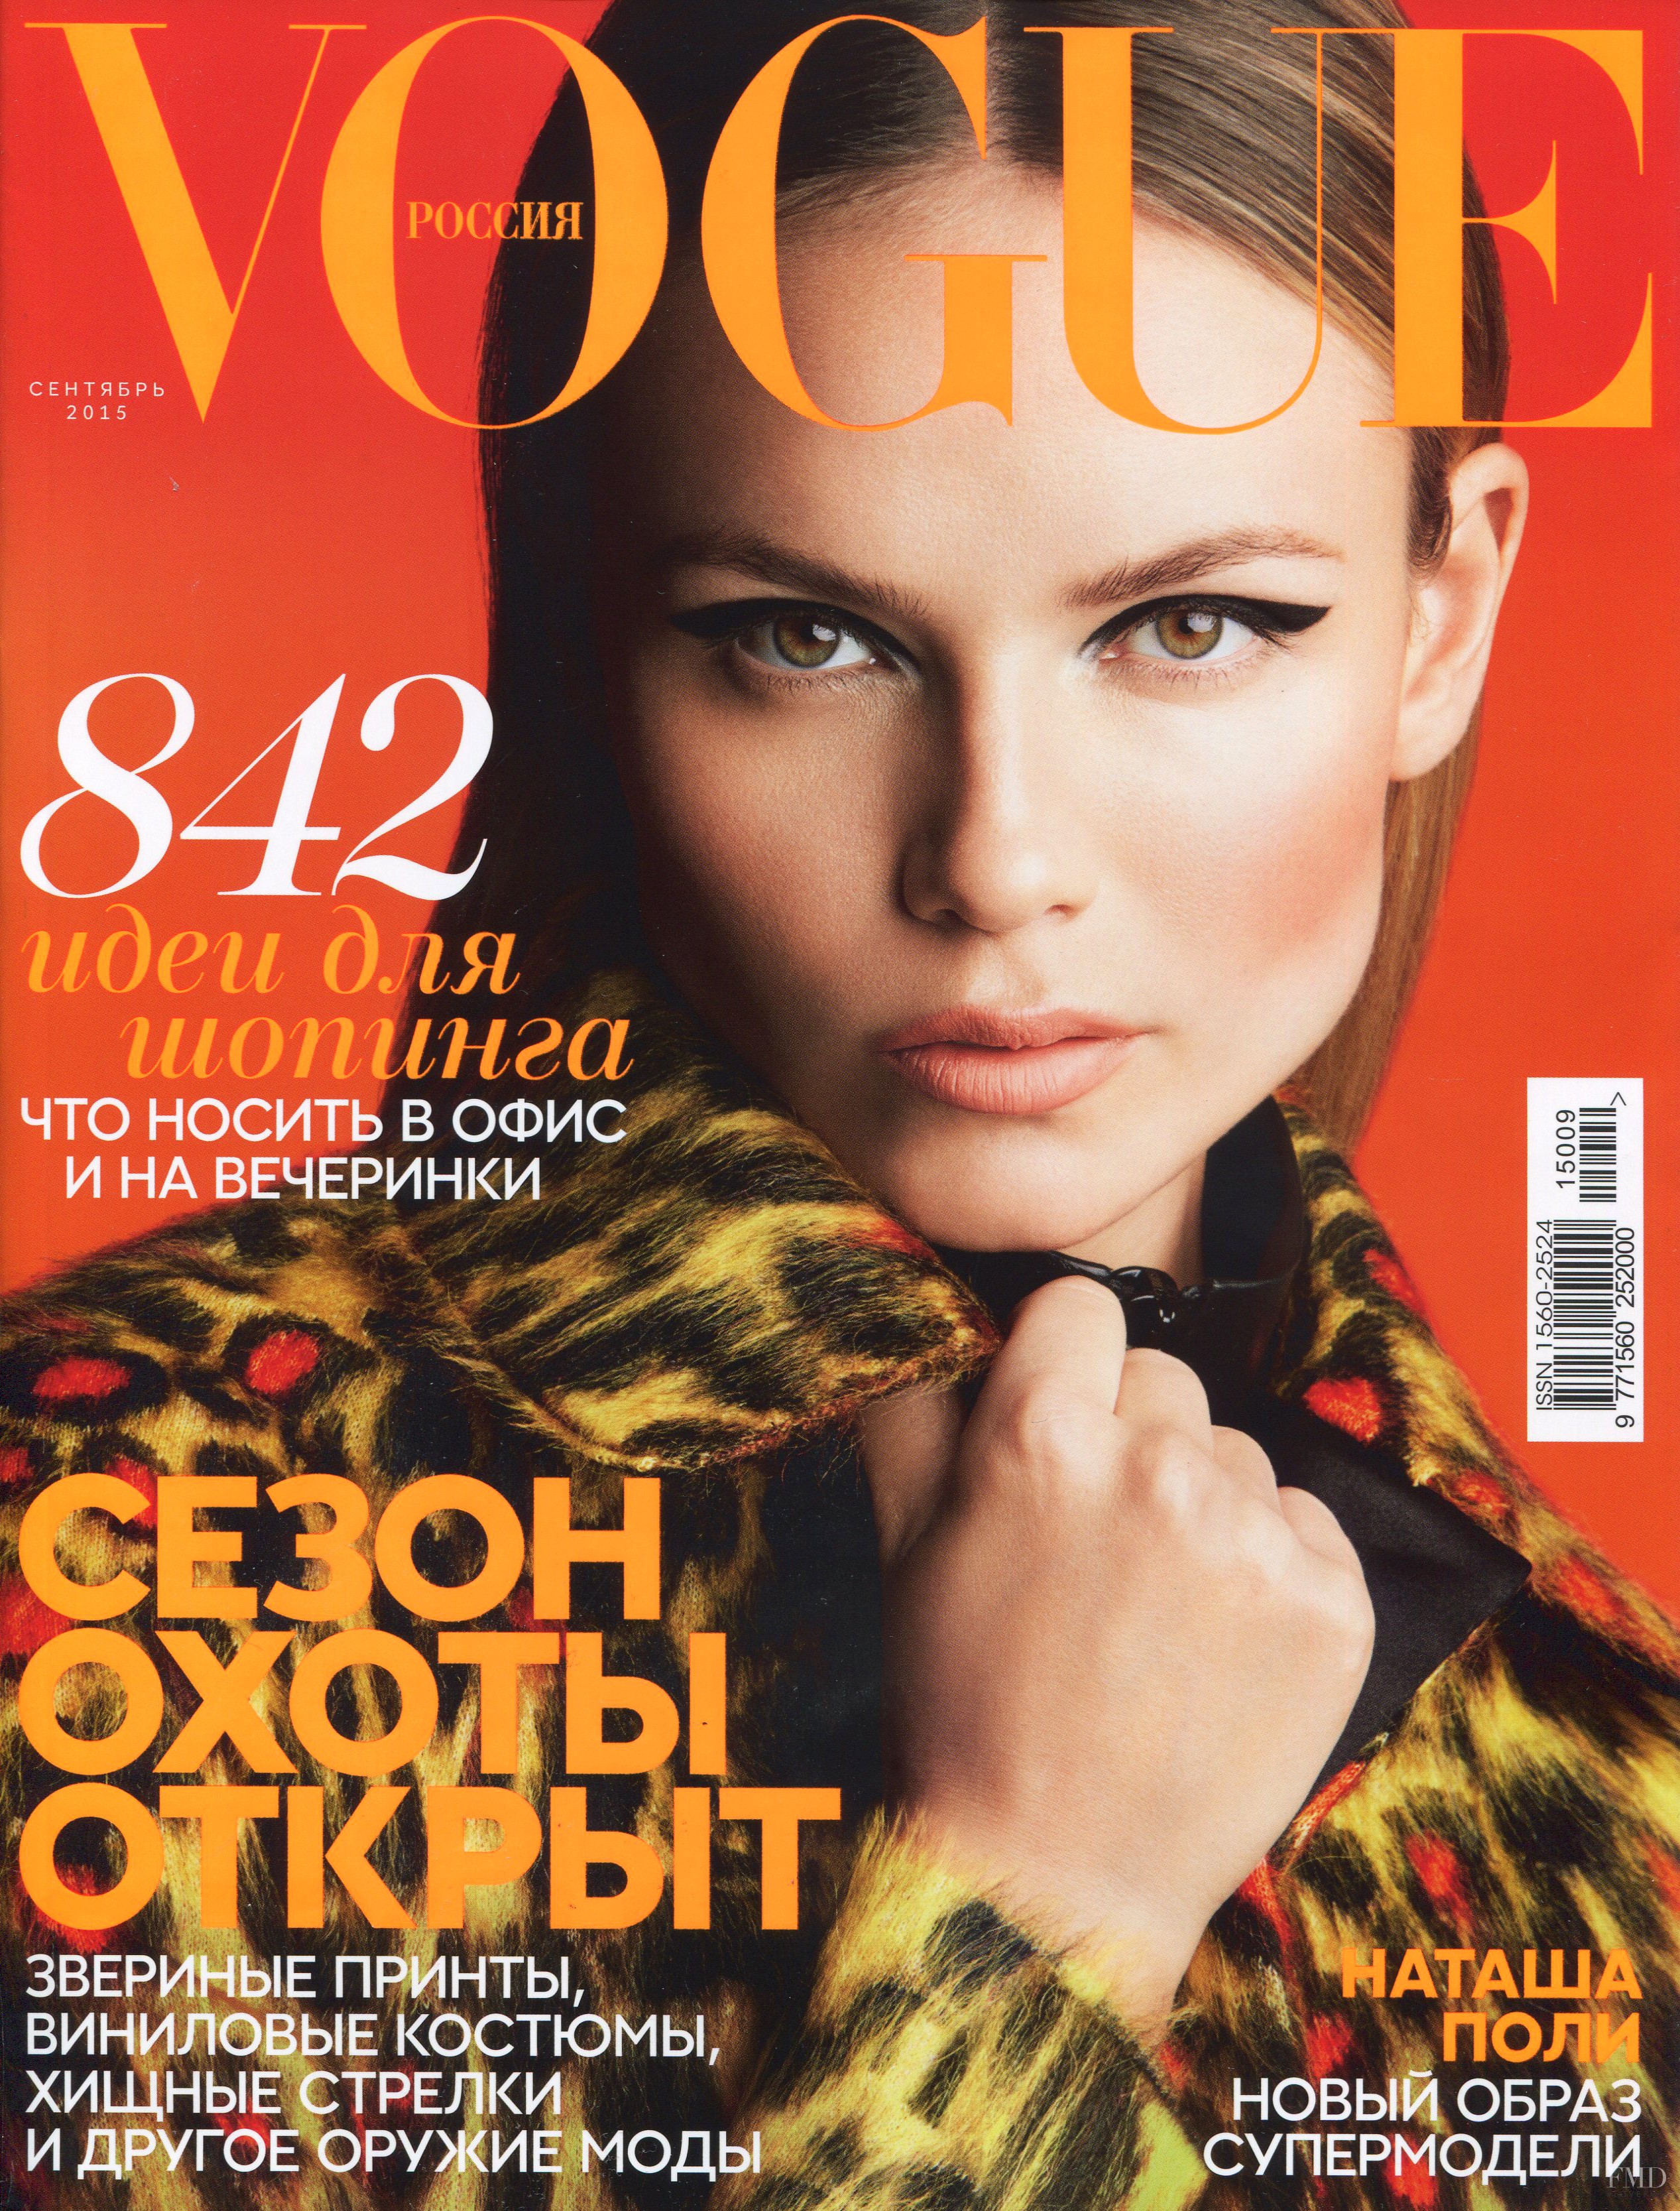 Cover of Vogue Russia with Natasha Poly, September 2015 (ID:34558 ...